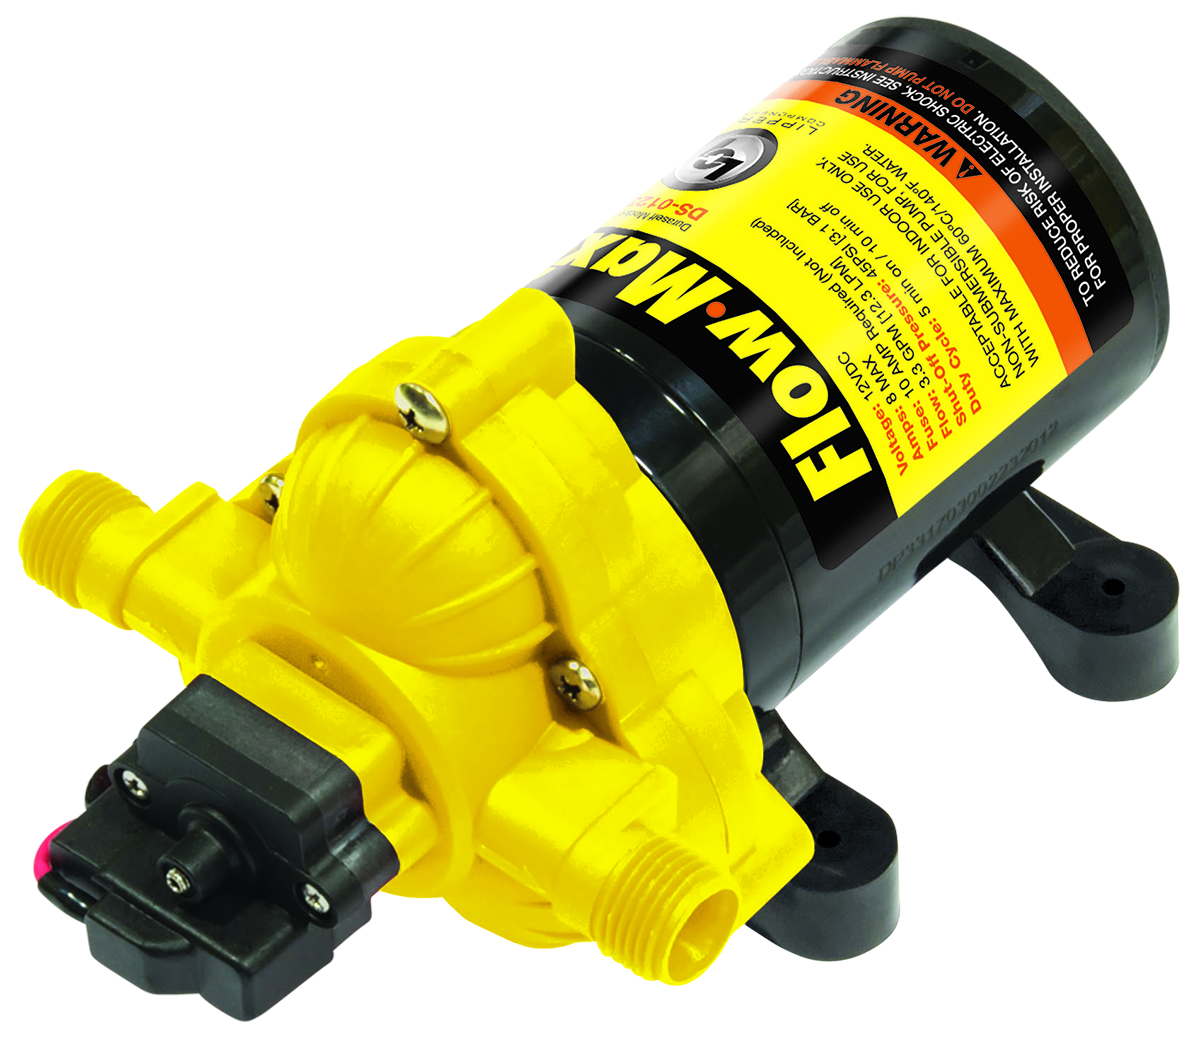 FLOW-MAX WATER PUMP 12V 3.0 GPM